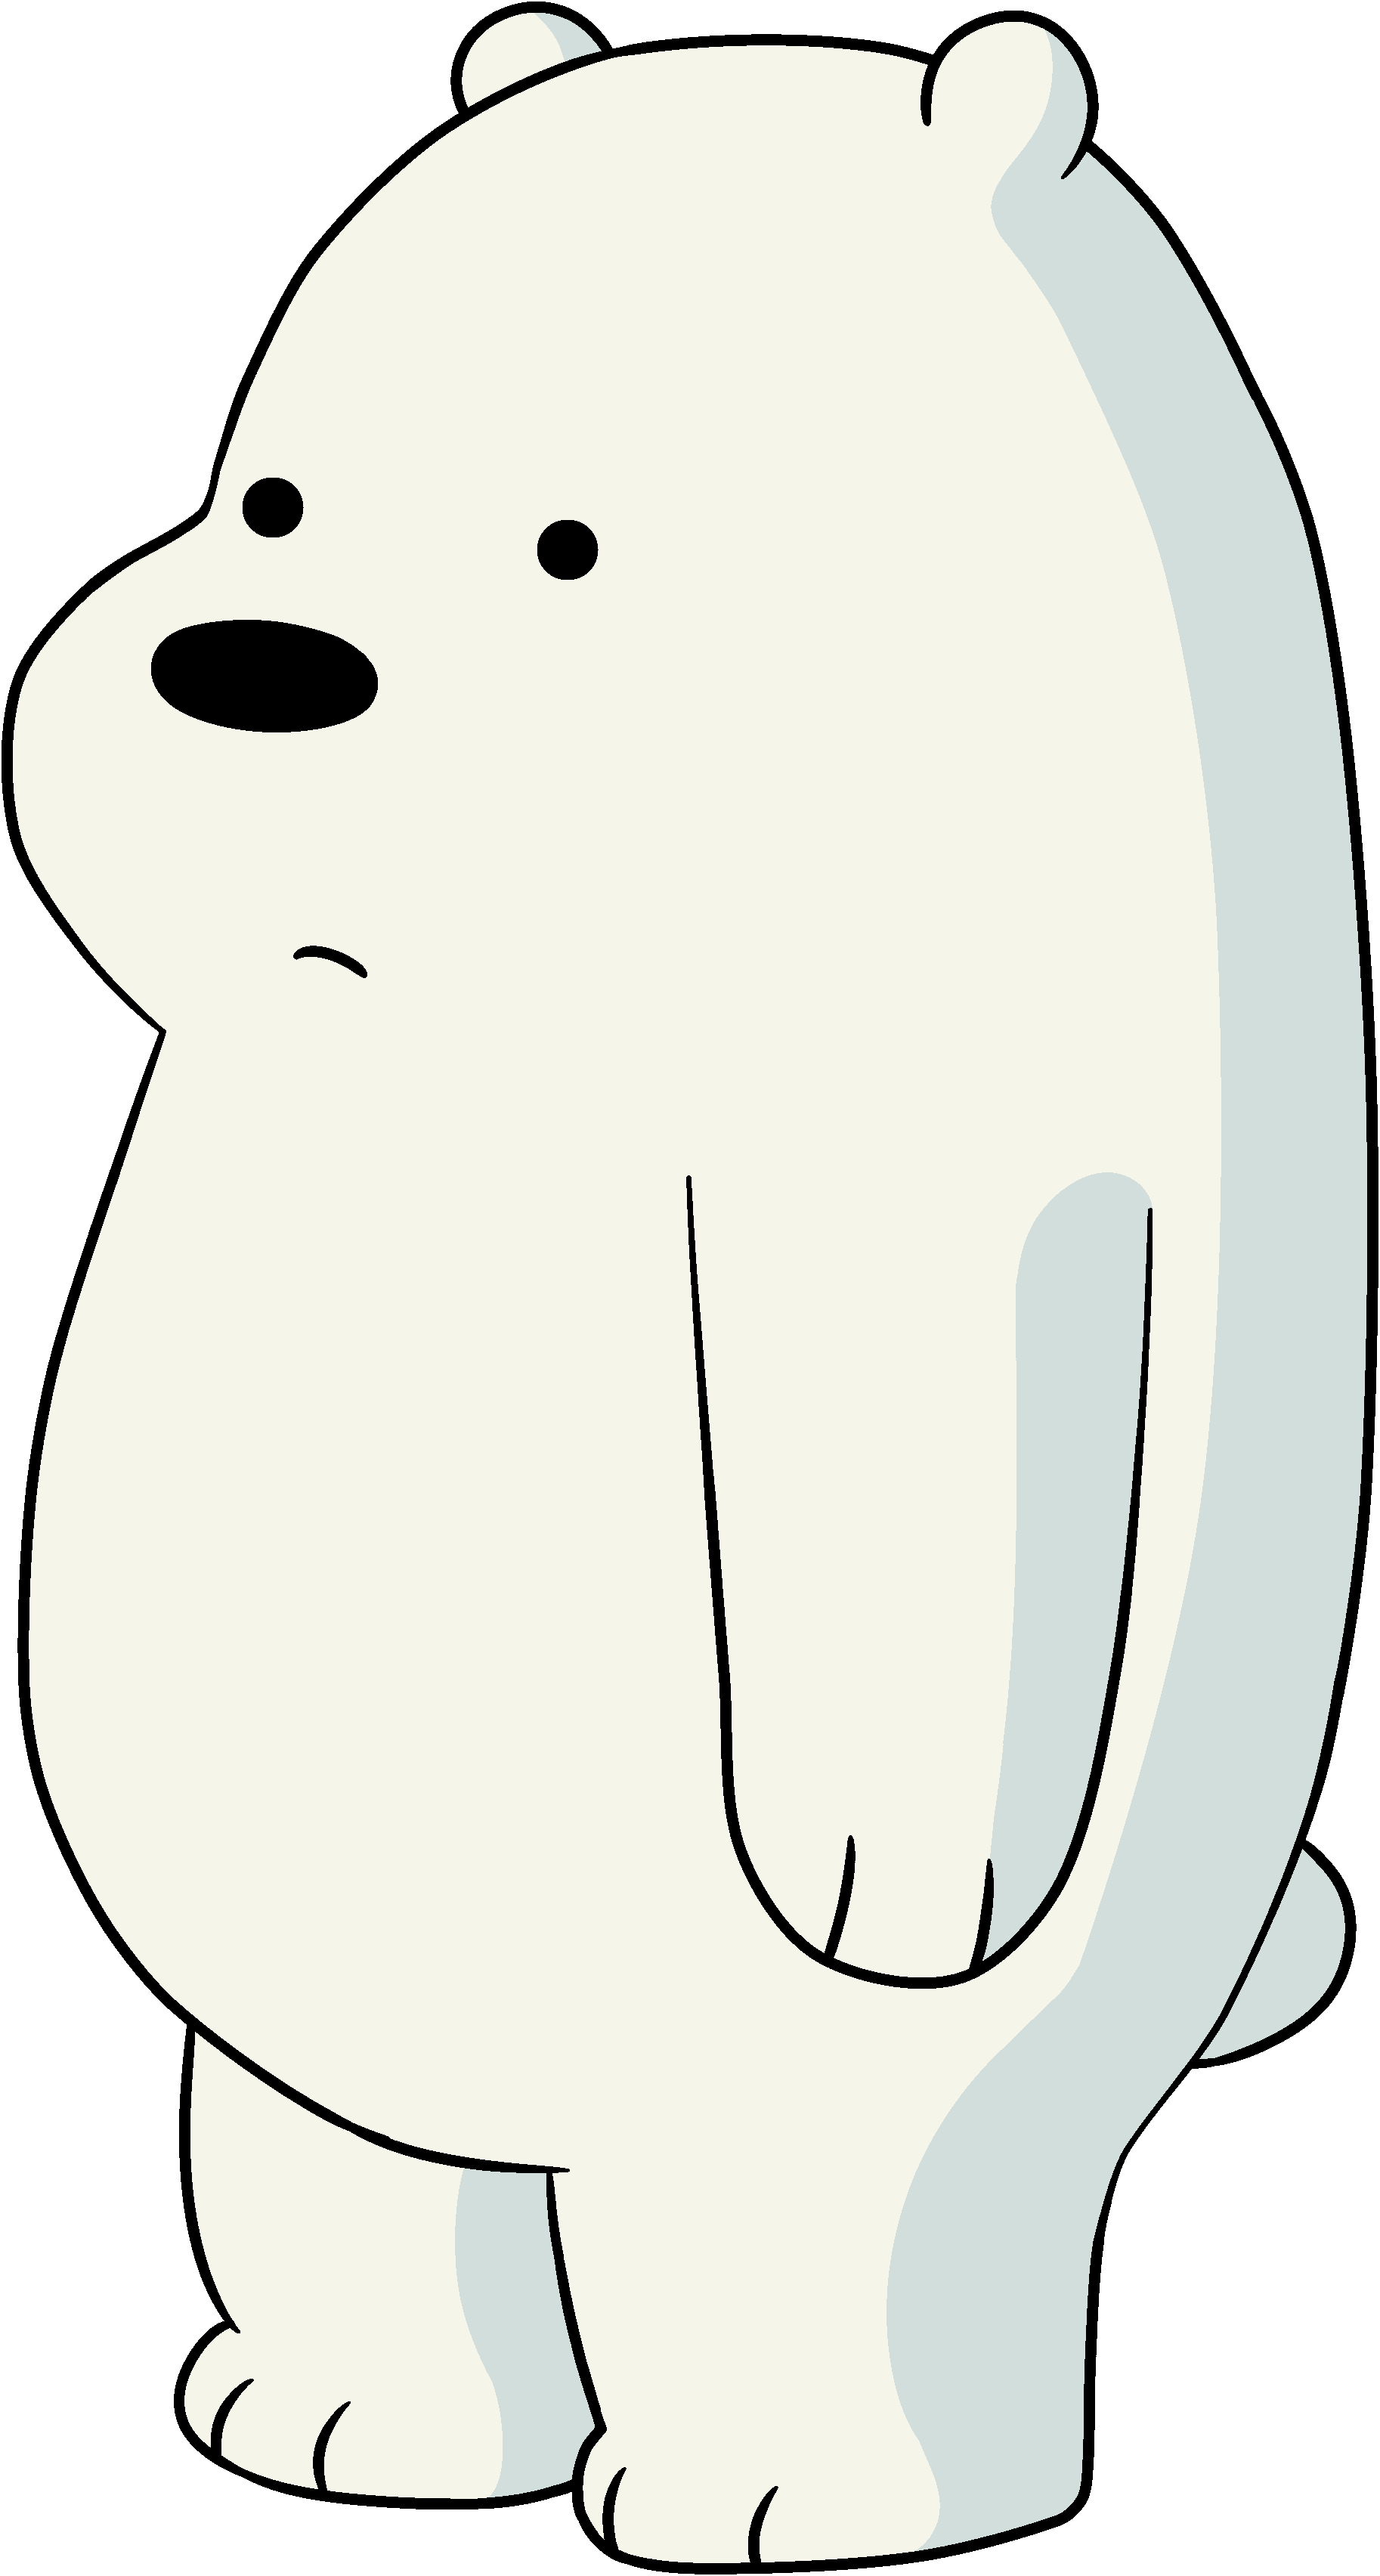 we bare bears scratchpad